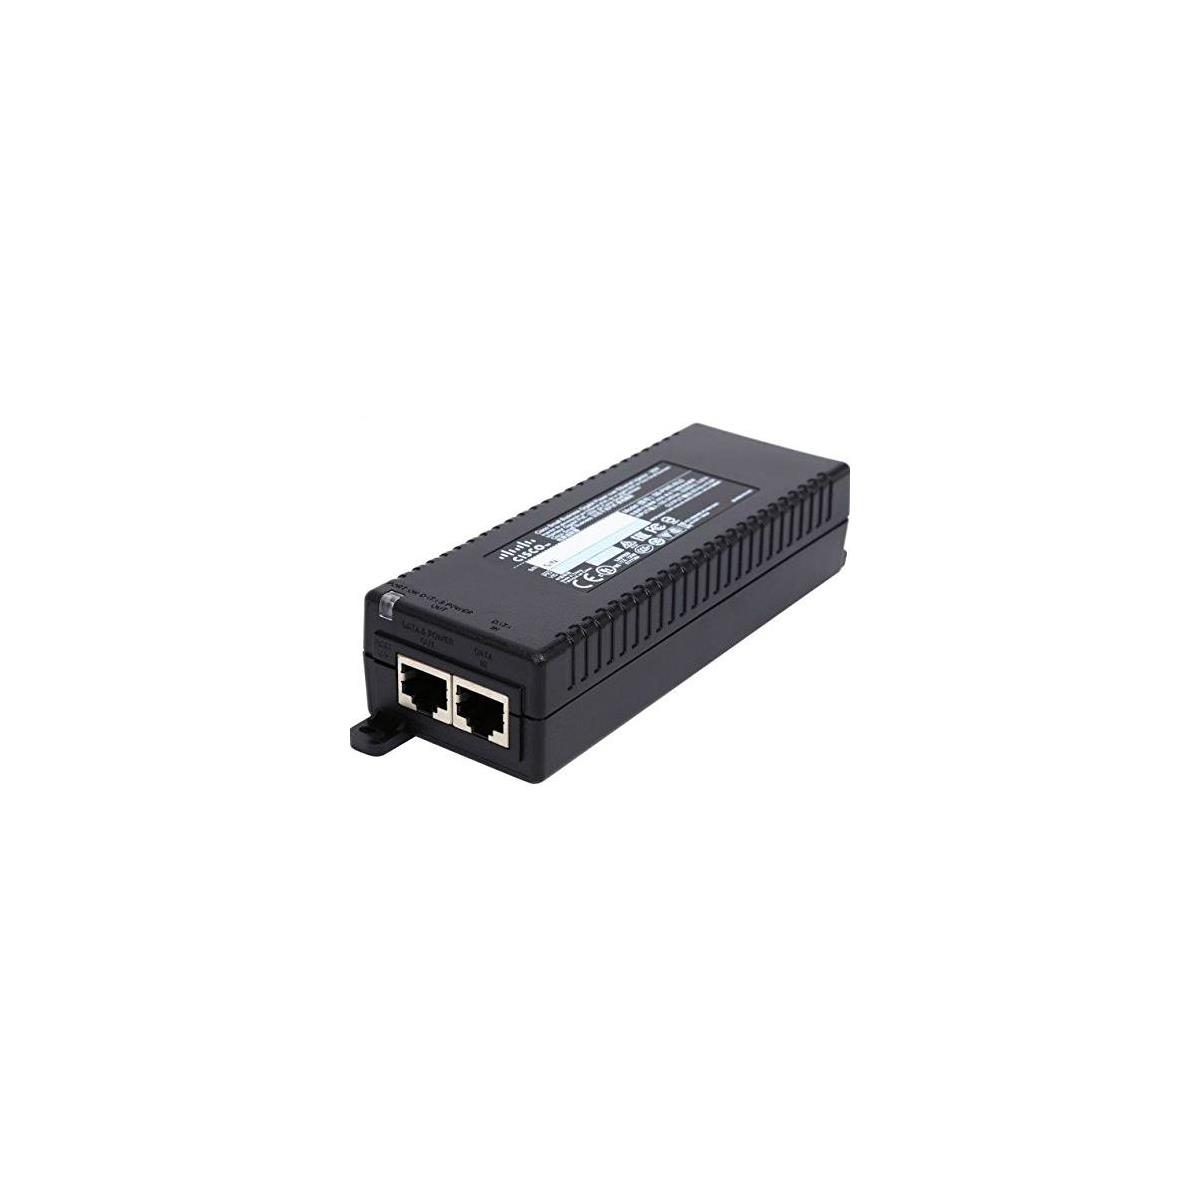 Image of Cisco 30W Small Business High Power Gigabit Power over Ethernet Injector